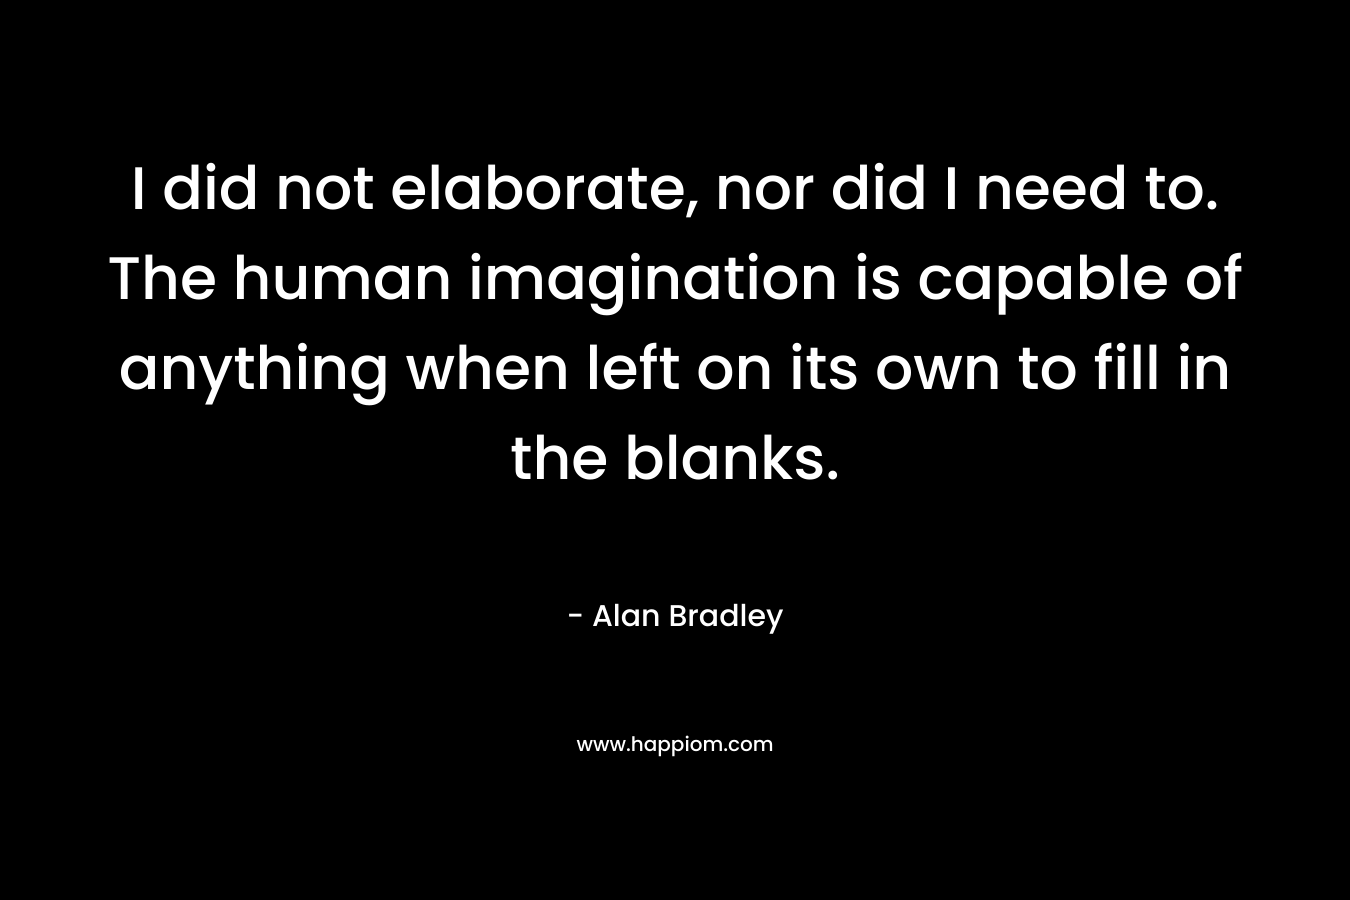 I did not elaborate, nor did I need to. The human imagination is capable of anything when left on its own to fill in the blanks. – Alan Bradley